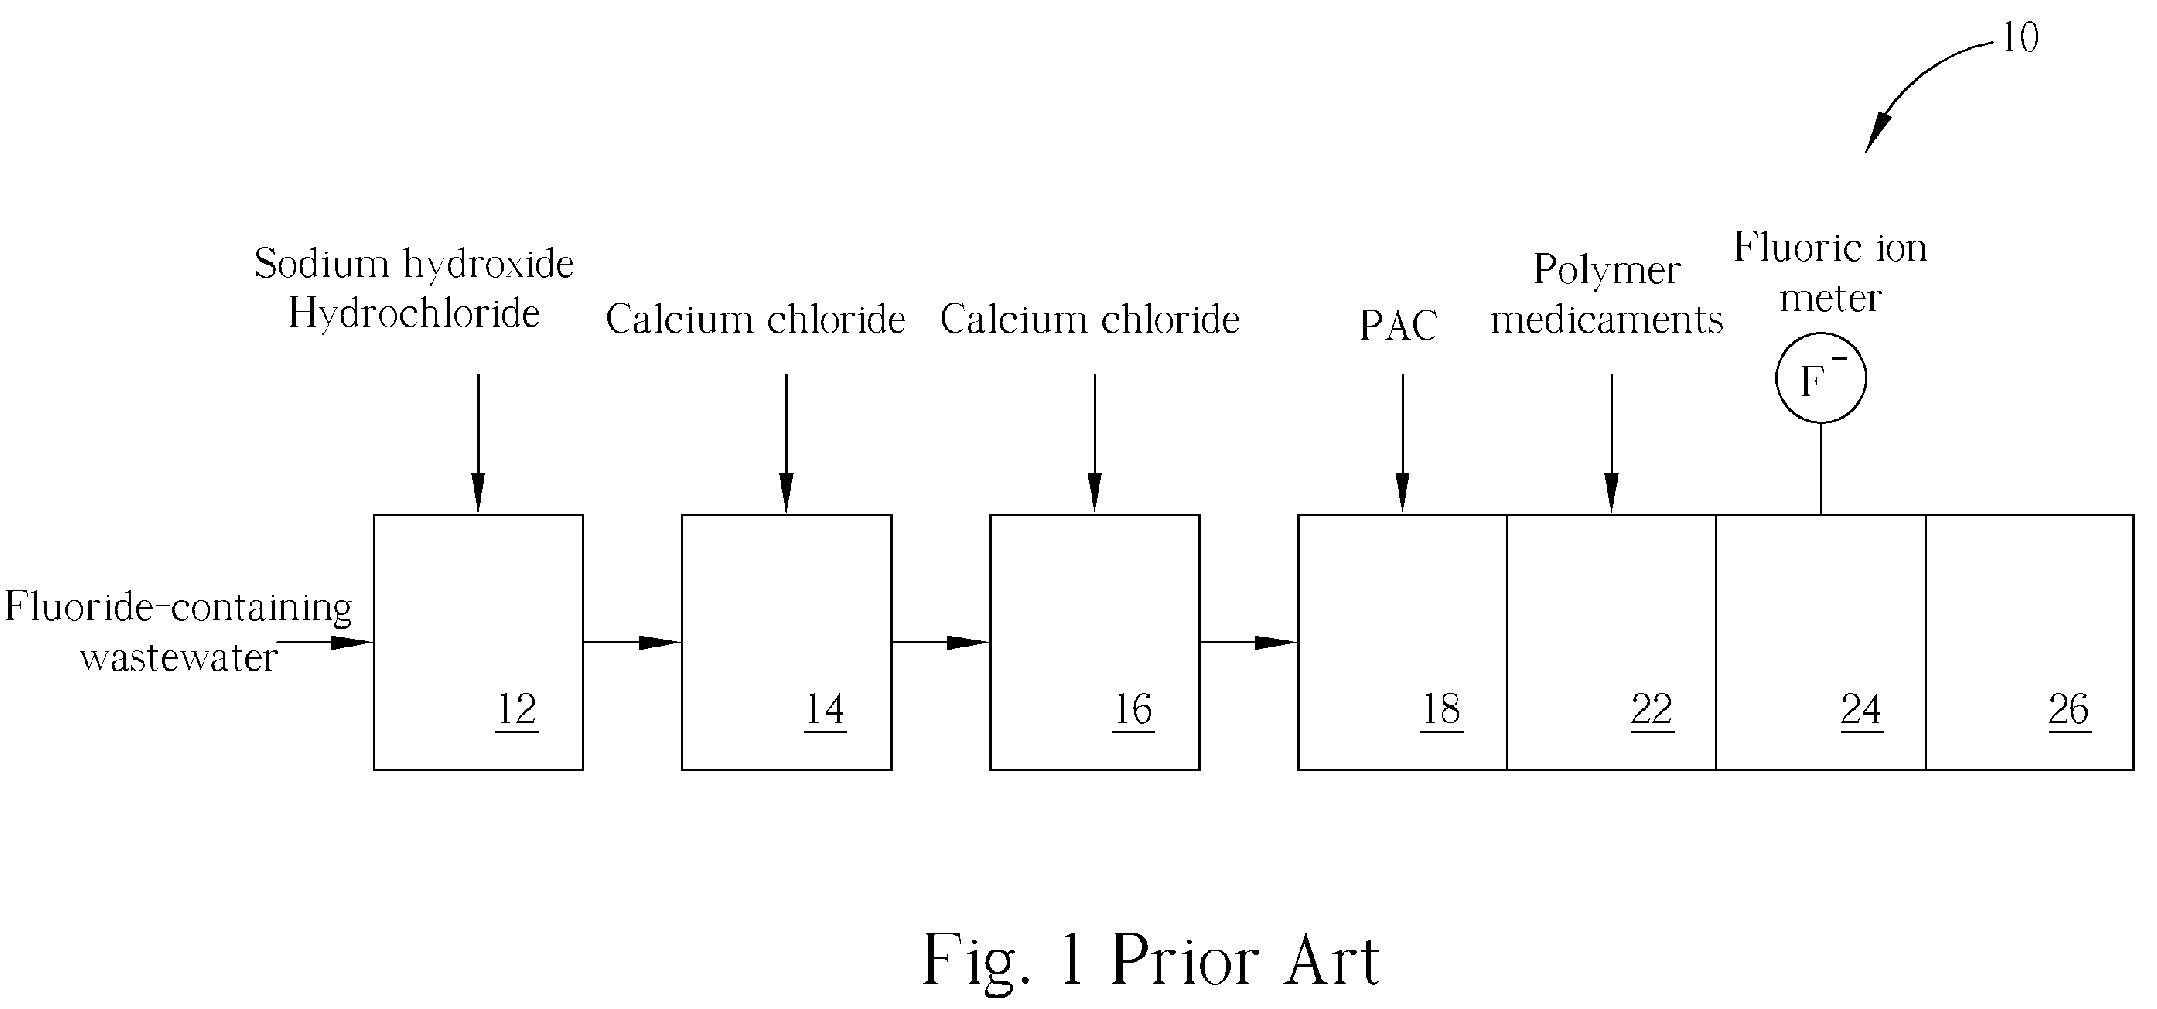 Method of fluoride-containing wastewater treatment